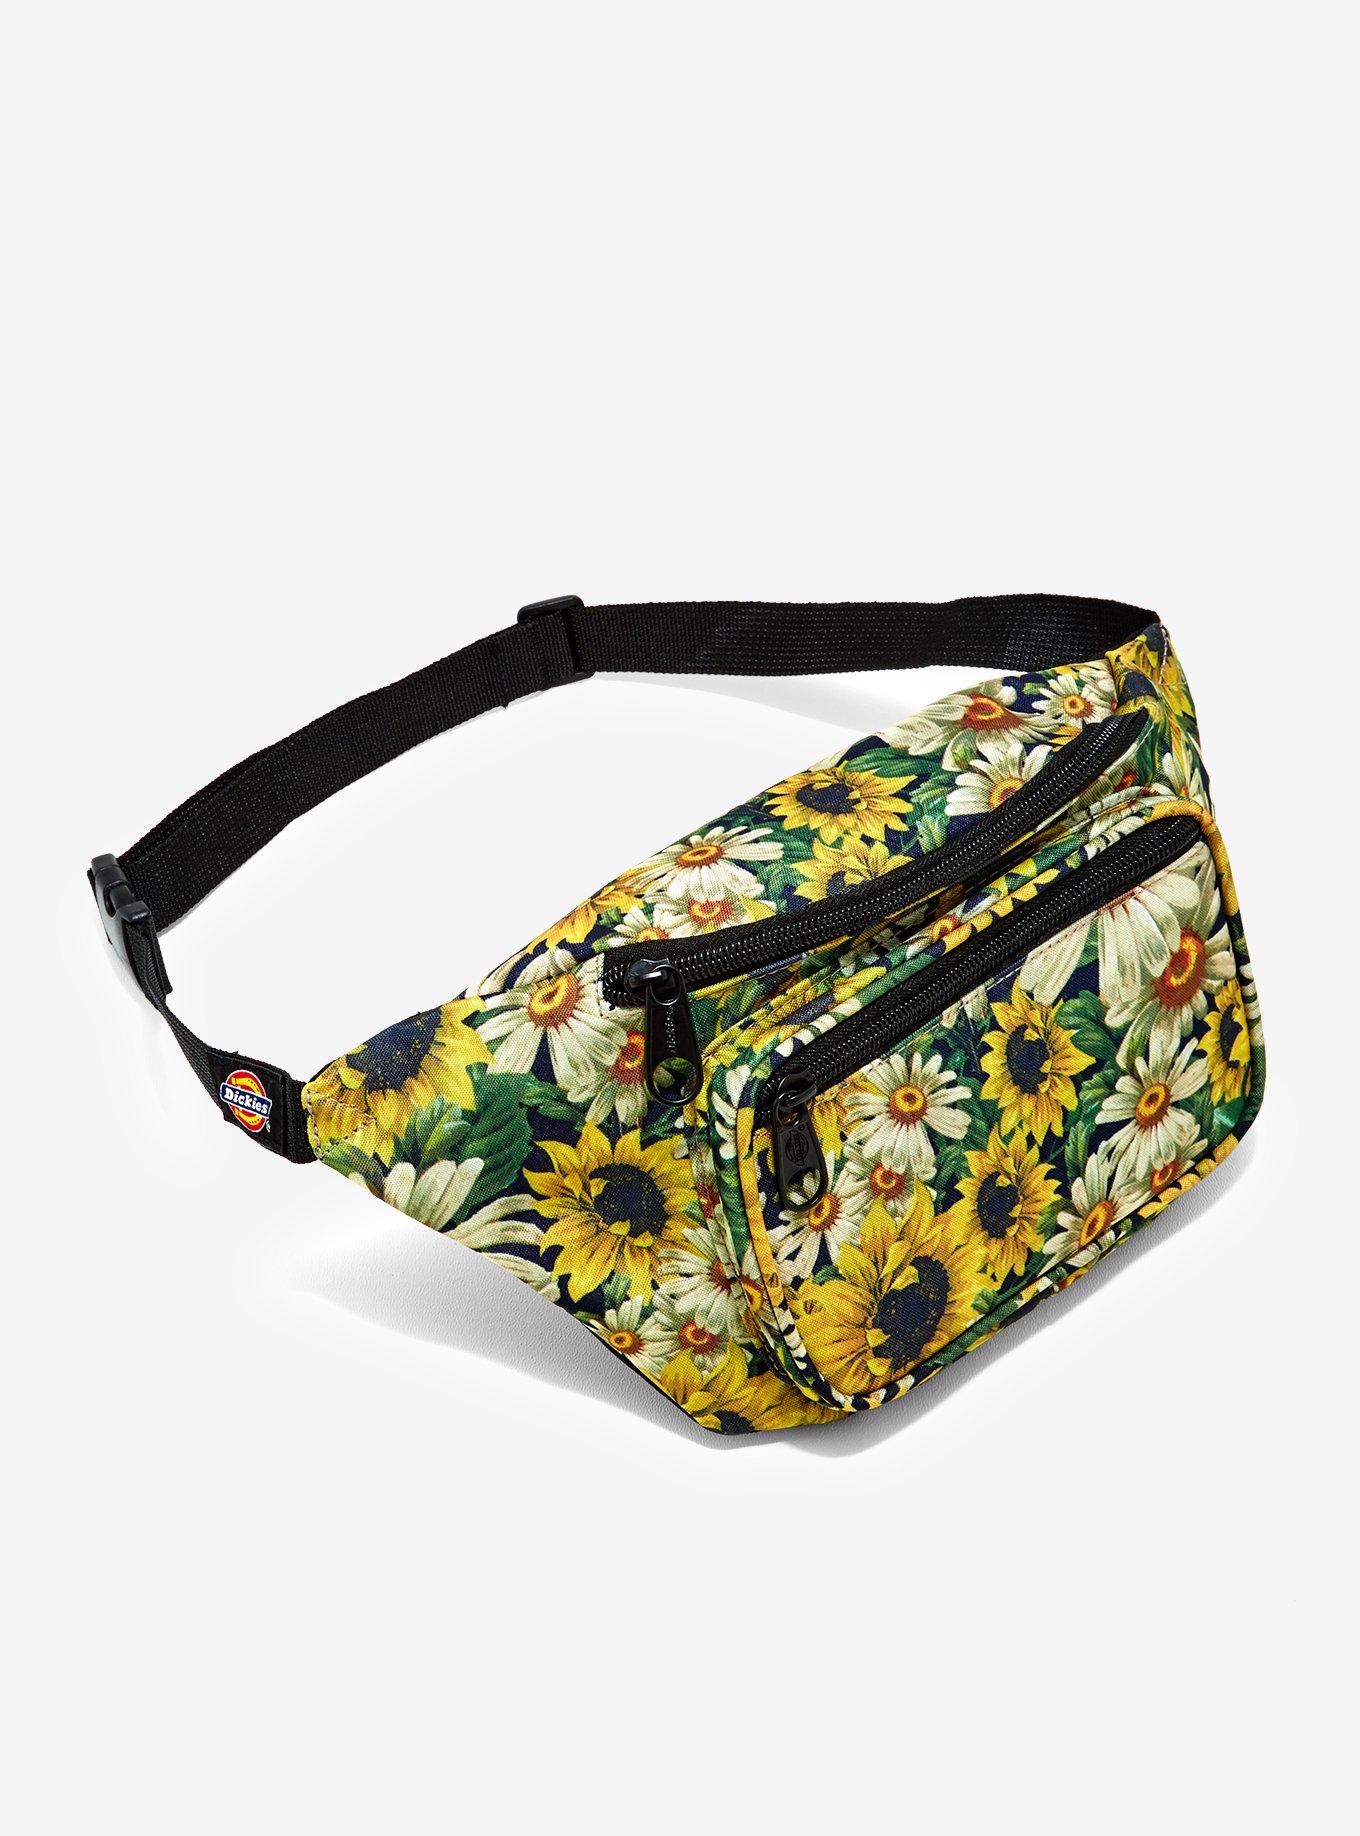 Dickies Sunflower & Daisy Fanny Pack, , hi-res